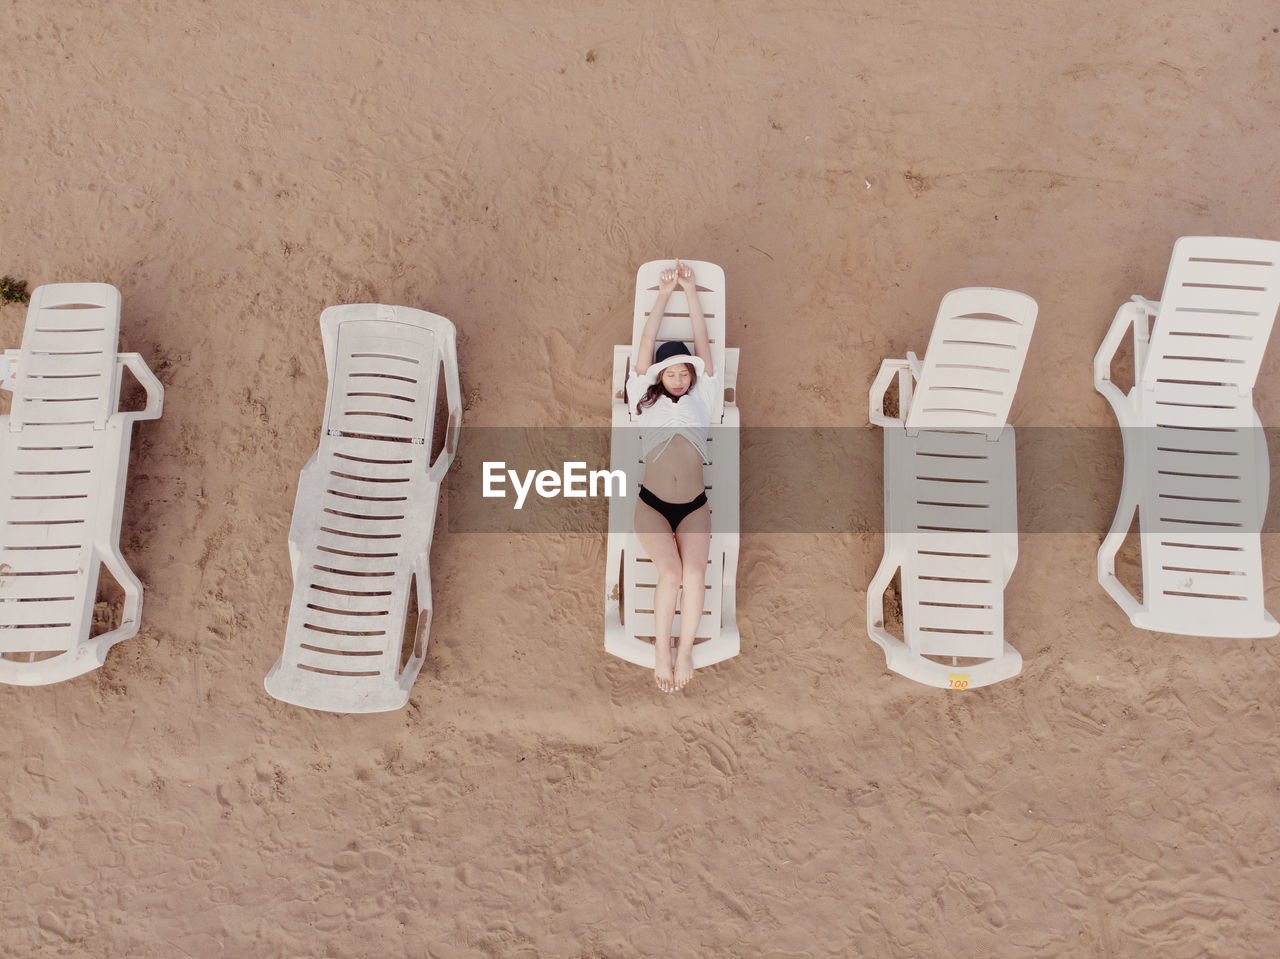 HIGH ANGLE VIEW OF CHAIRS IN SAND